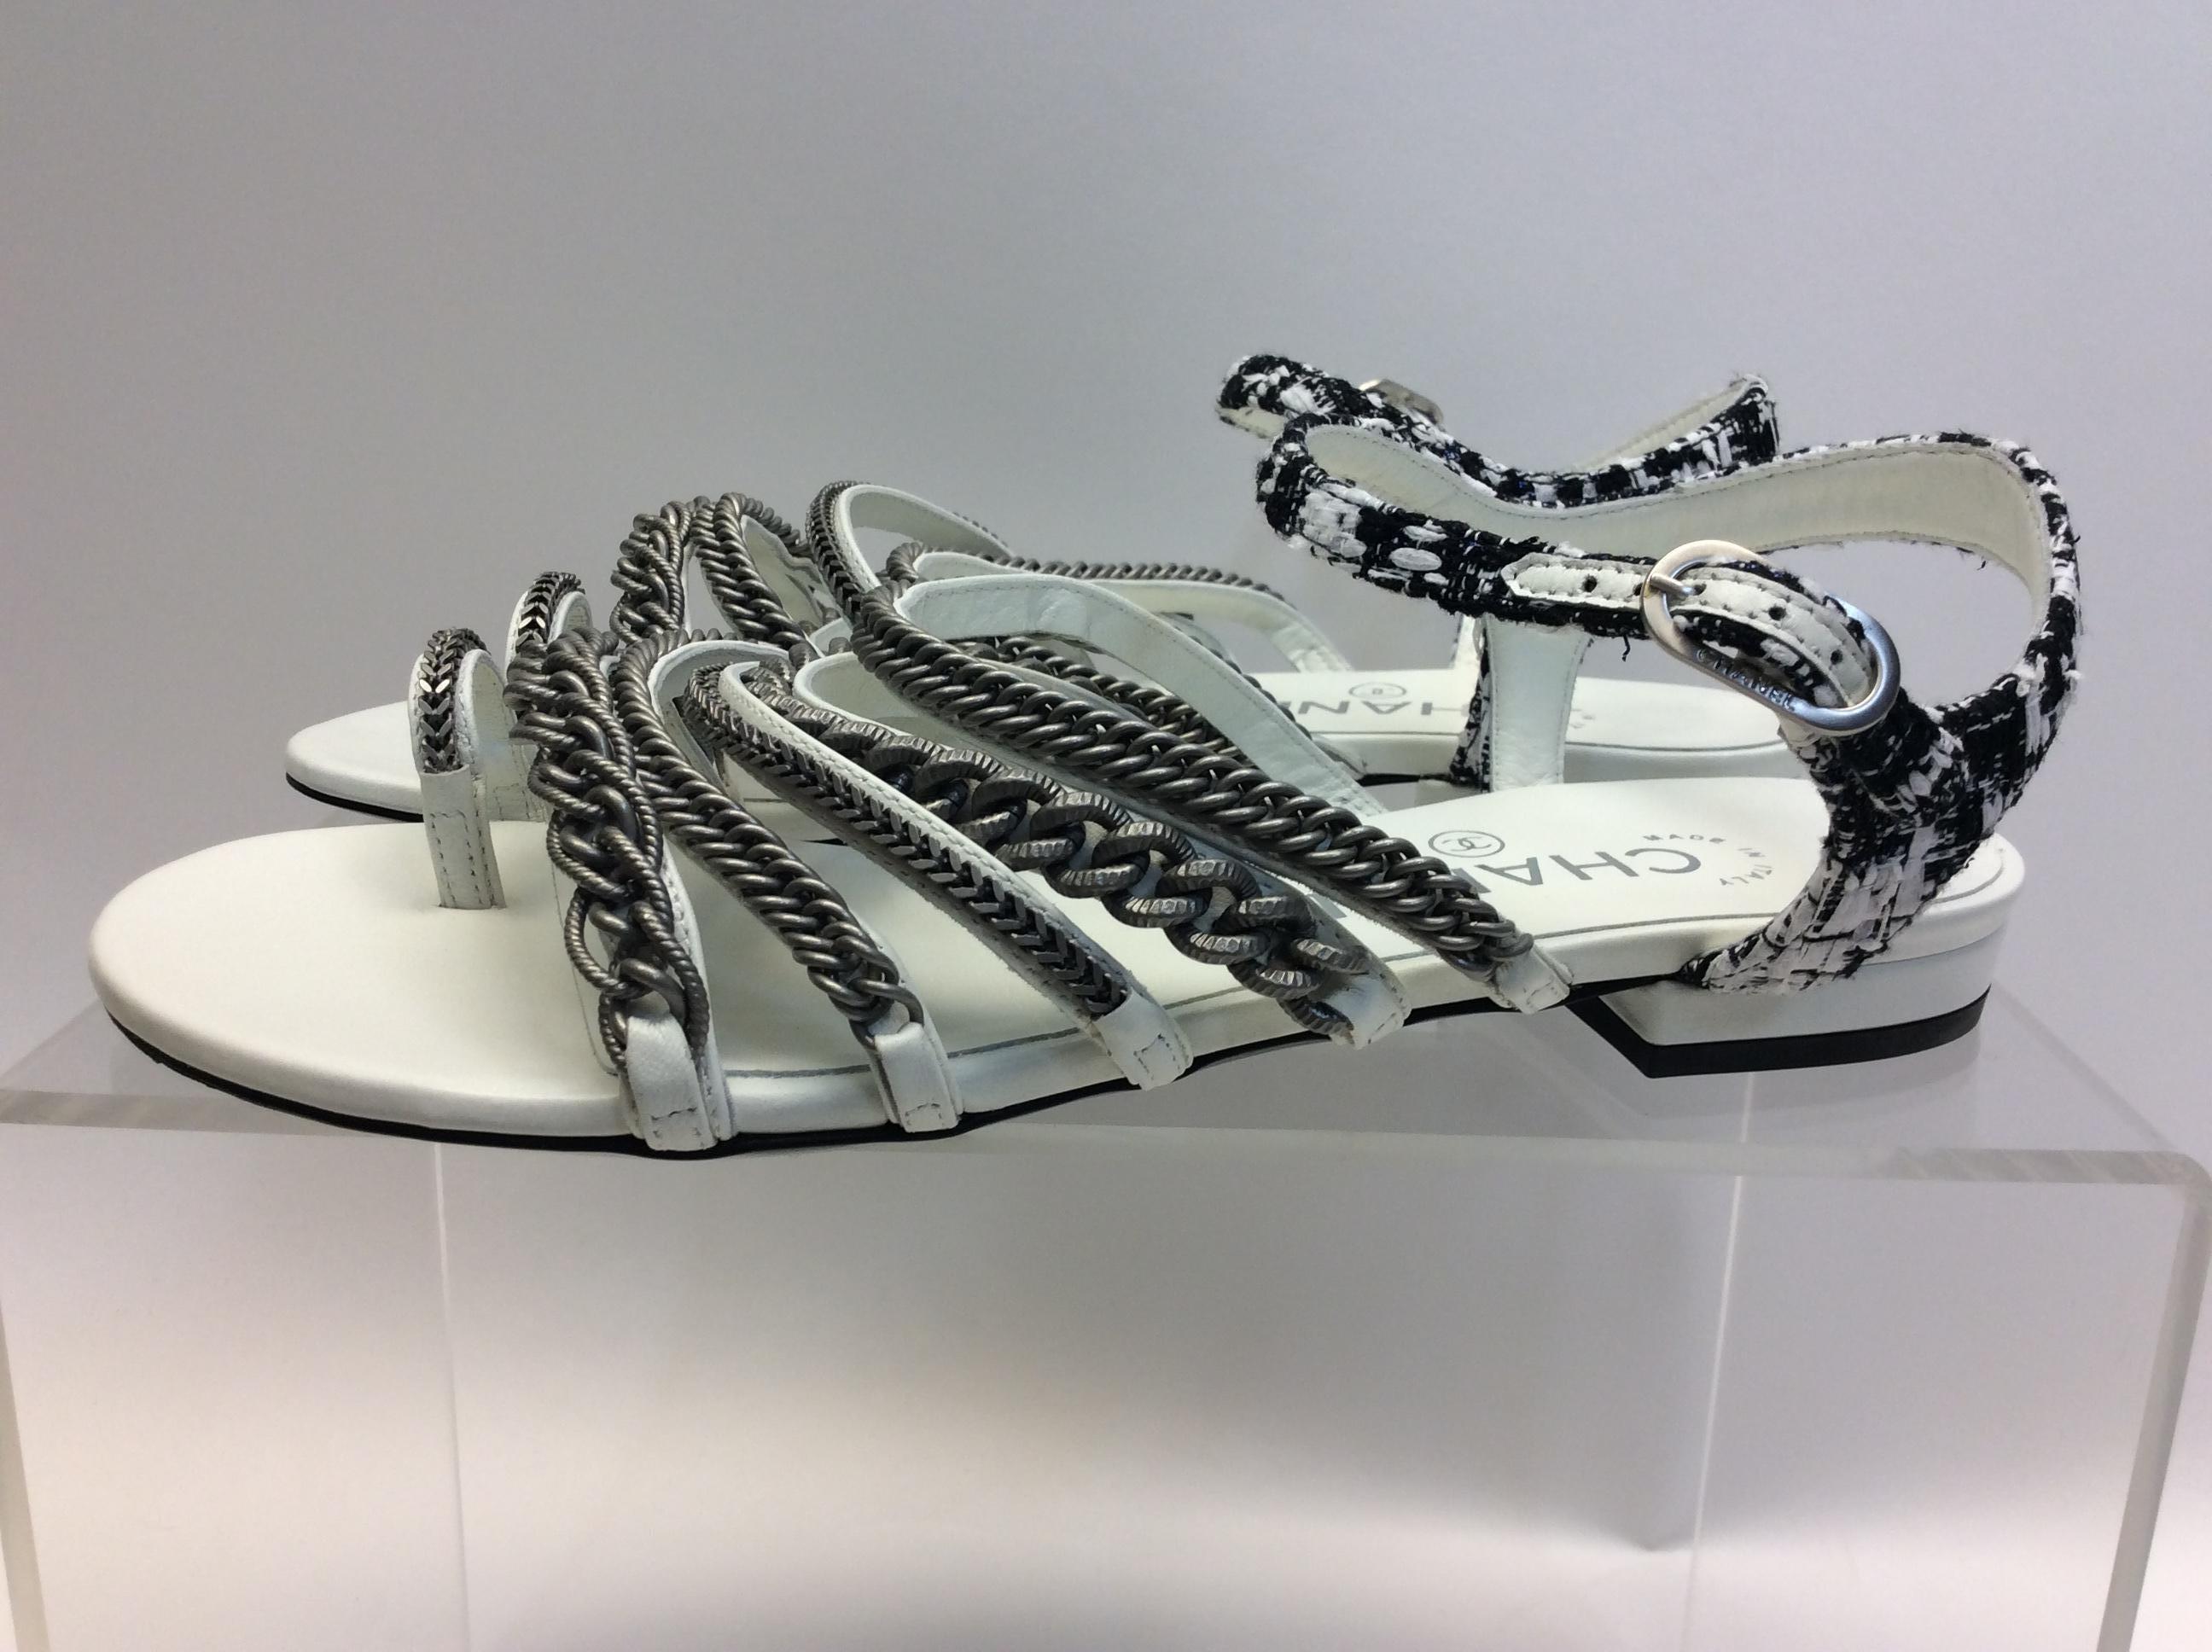 Chanel White Leather and Silver Chain Strappy Sandal NIB
Made in Italy
Size 36.5